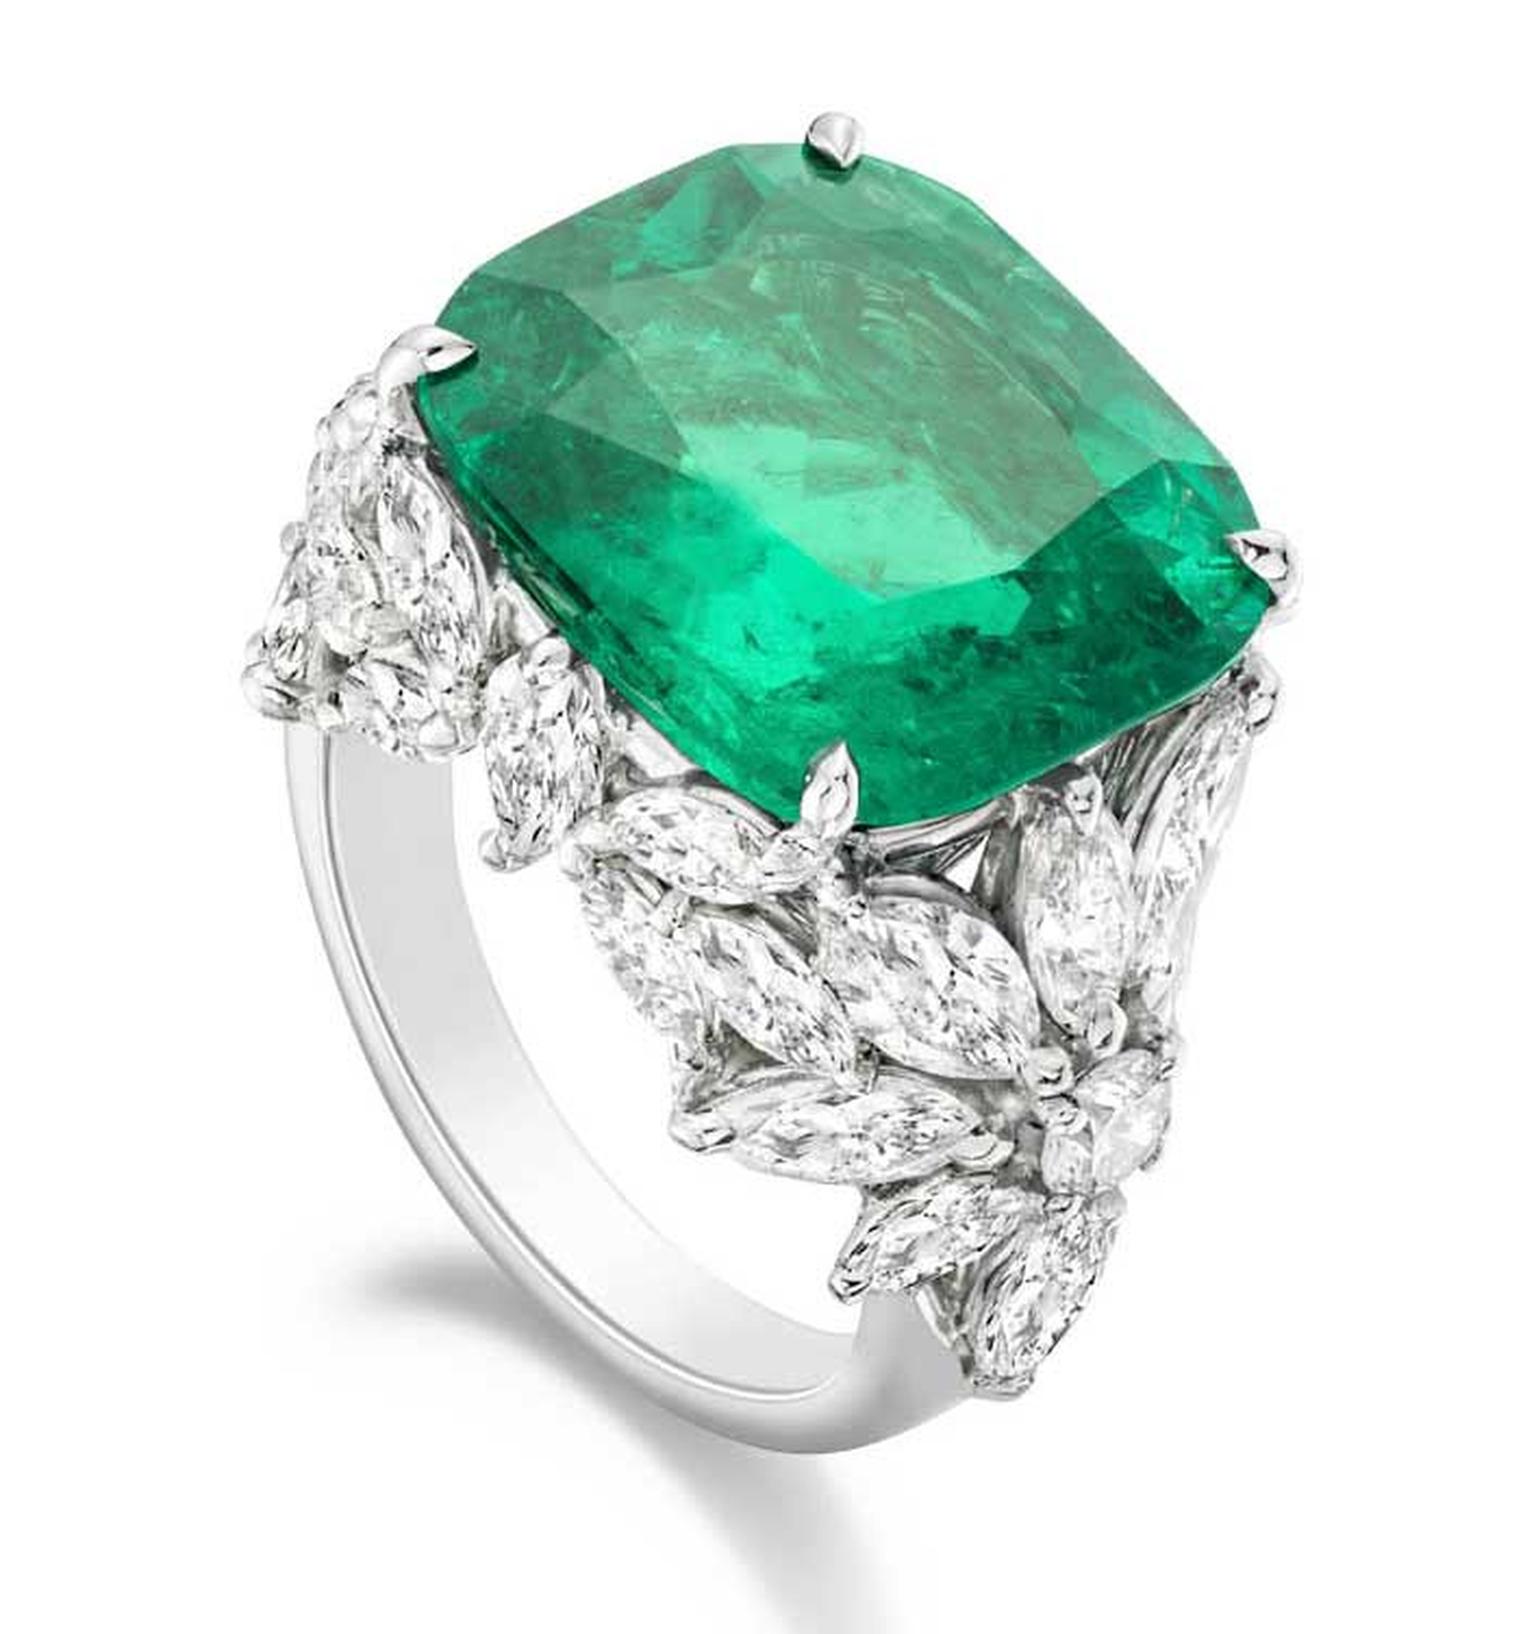 Extremely Piaget emerald ring with diamonds.